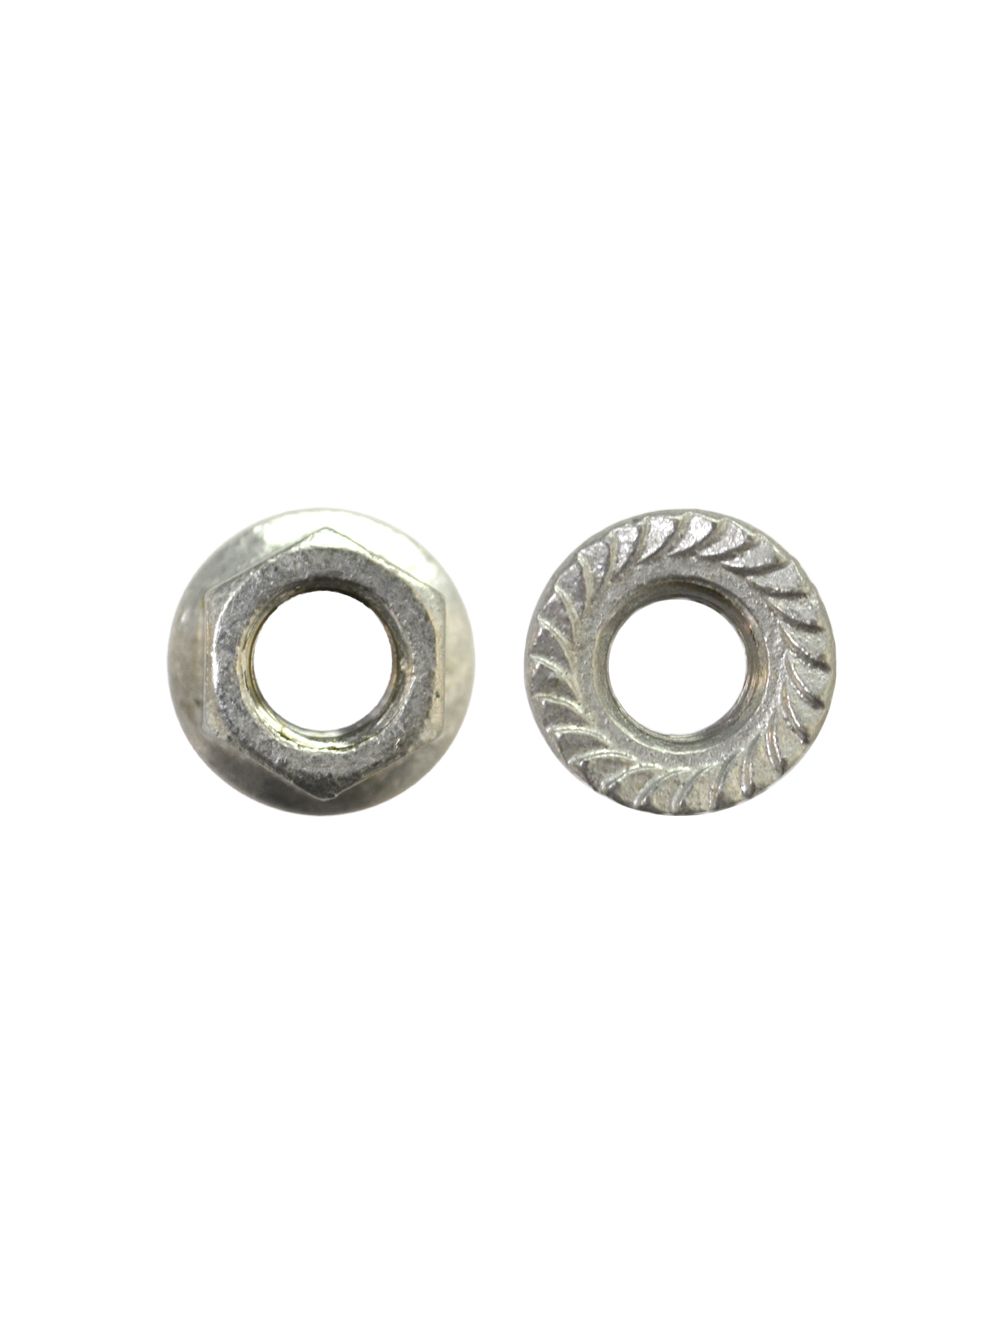 Serrated 3/8-16 Hex Flange Nuts 2000pcs Ships FREE in USA 18-8 304 Stainless Steel 